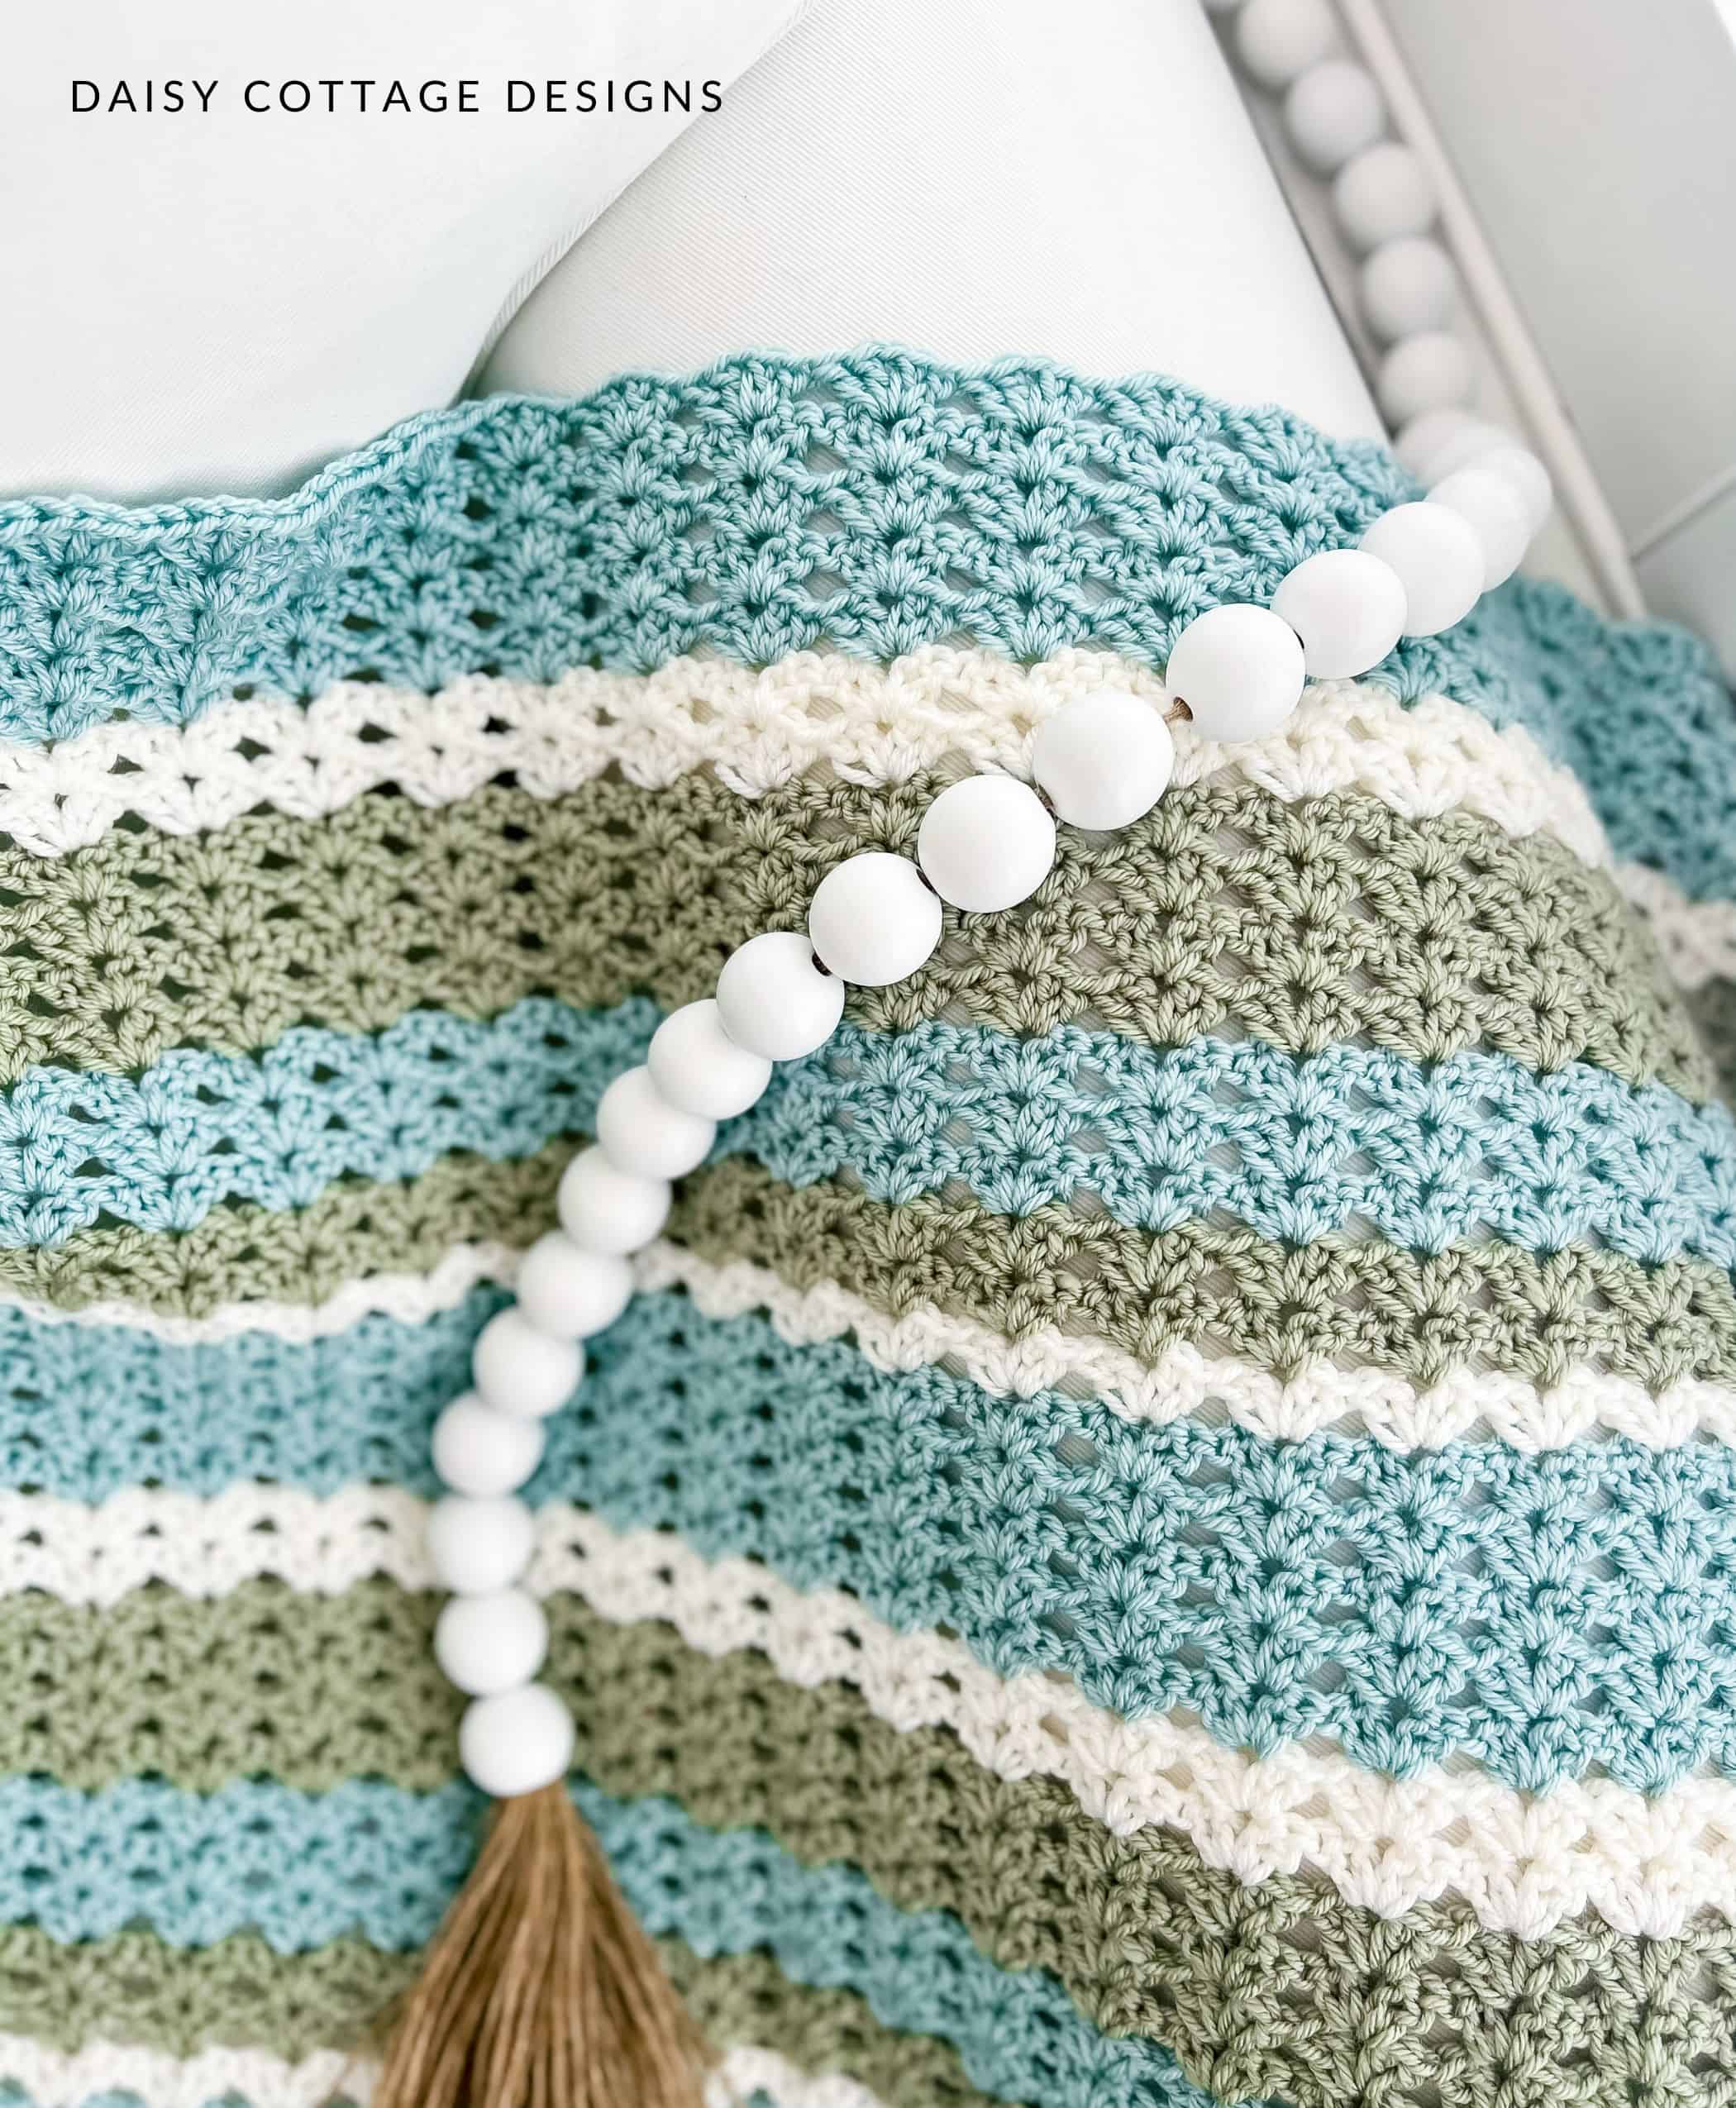 How to Crochet For Absolute Beginners - Tiny Couch Crochet